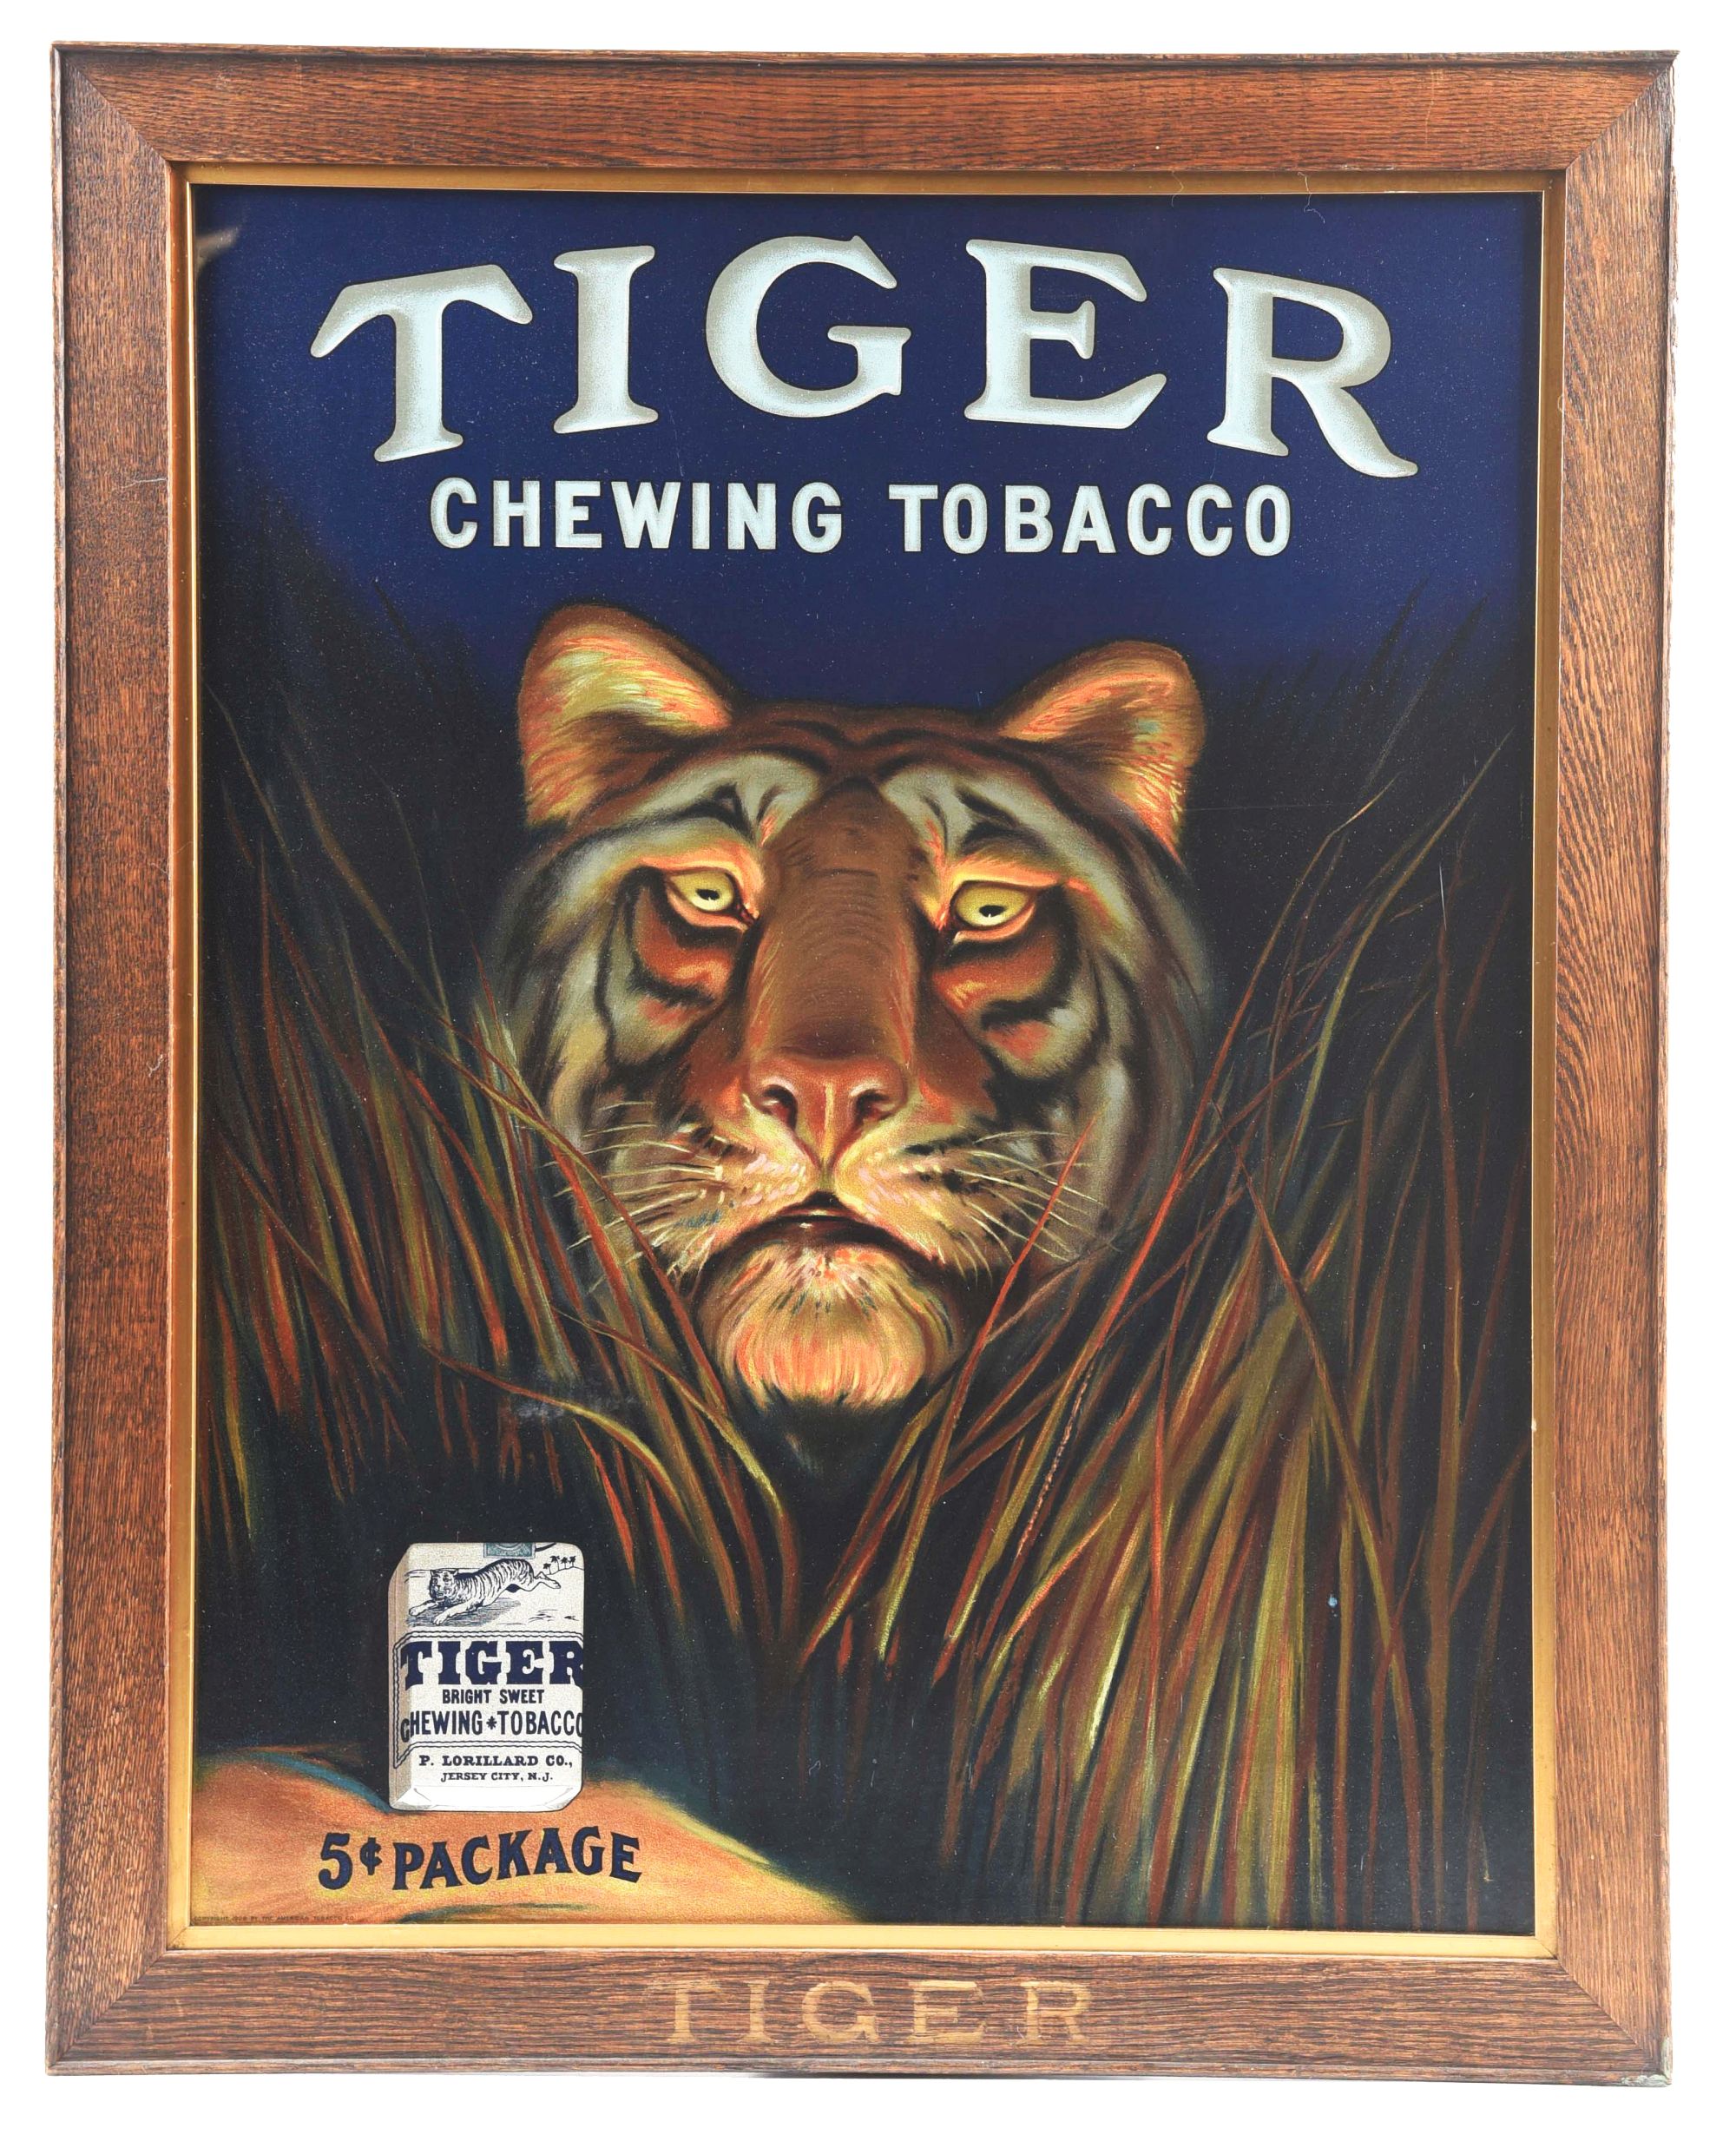  Tiger Chewing Tobacco framed advertising sign with 3D-like image of tiger peering through original wavy glass. Stamped ‘COPYRIGHT 1908 BY THE AMERICAN TOBACCO COMPANY’ in lower left-hand corner. Framed size: 32 x 26in. Near-mint condition. Estimate $4,000-$8,000